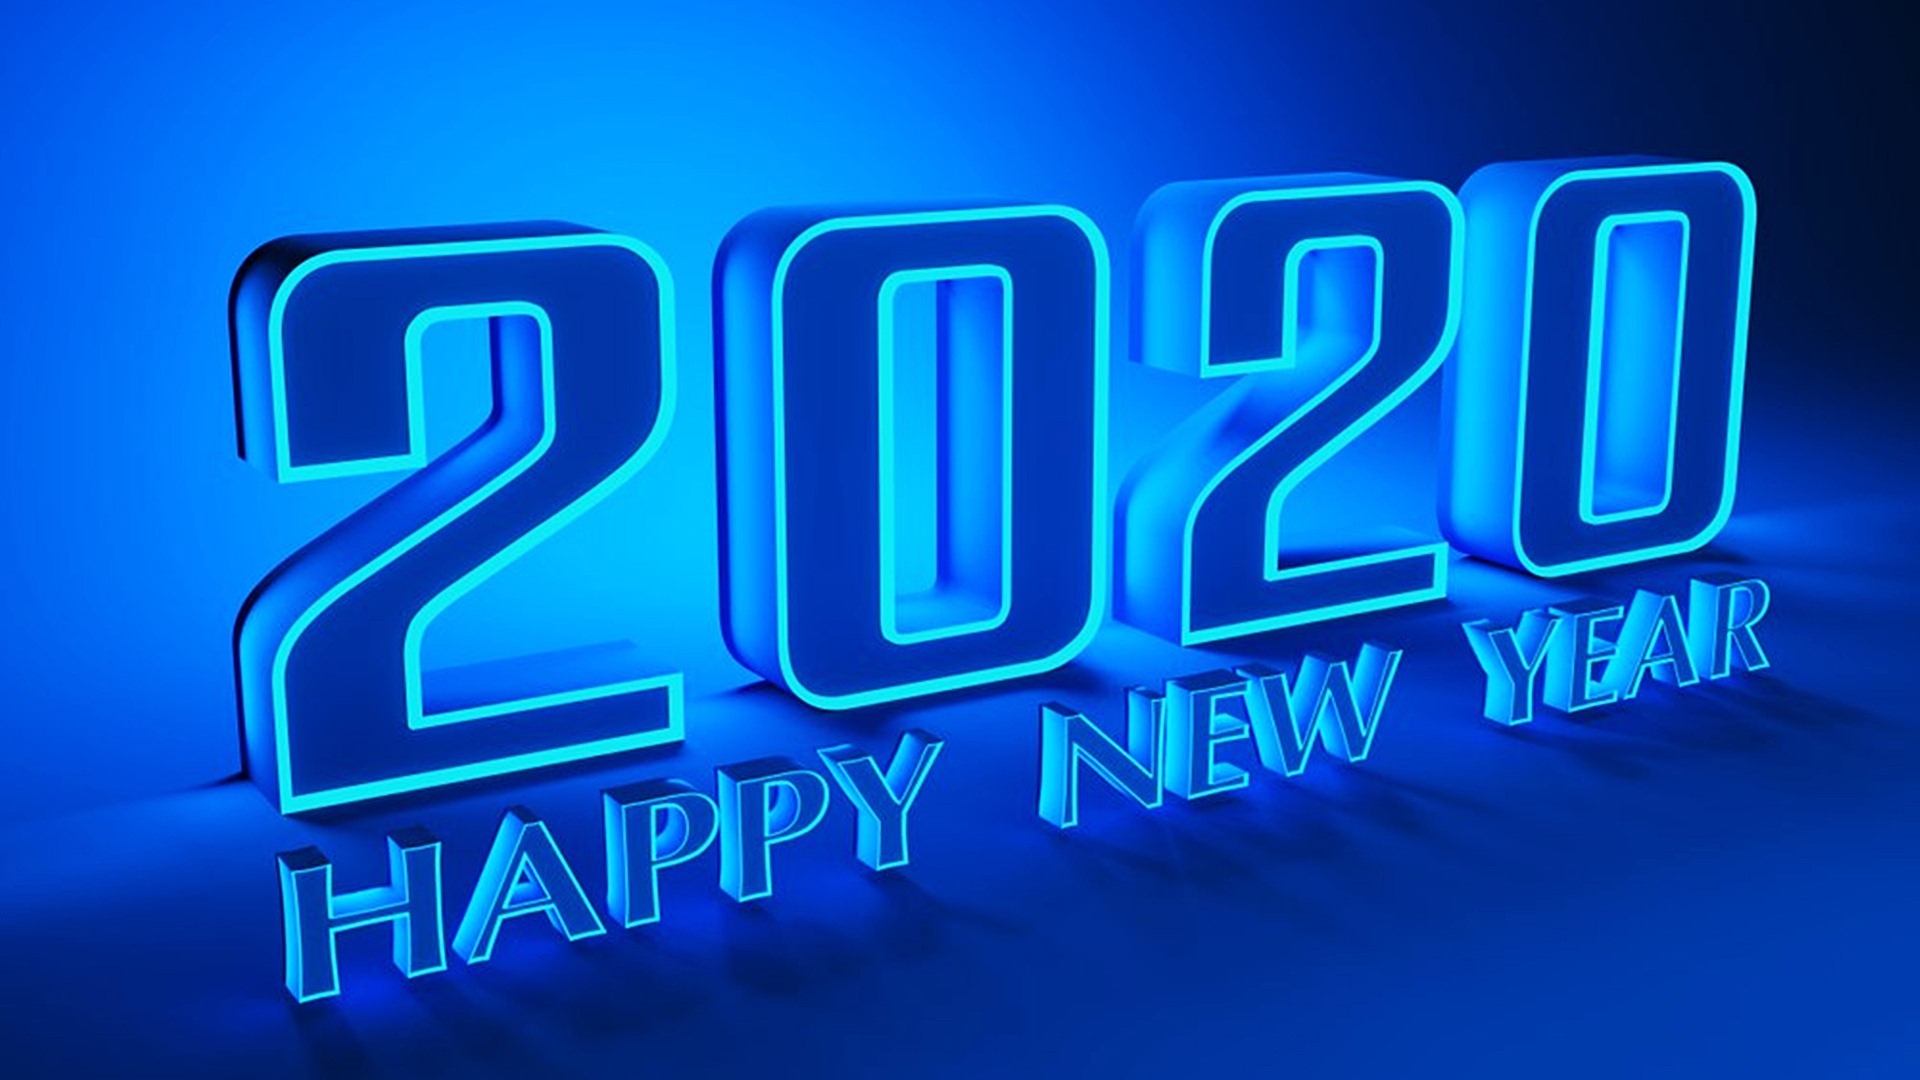 Happy New Year 2020 Wishes Message Quotes Wallapers GIFs Greetings